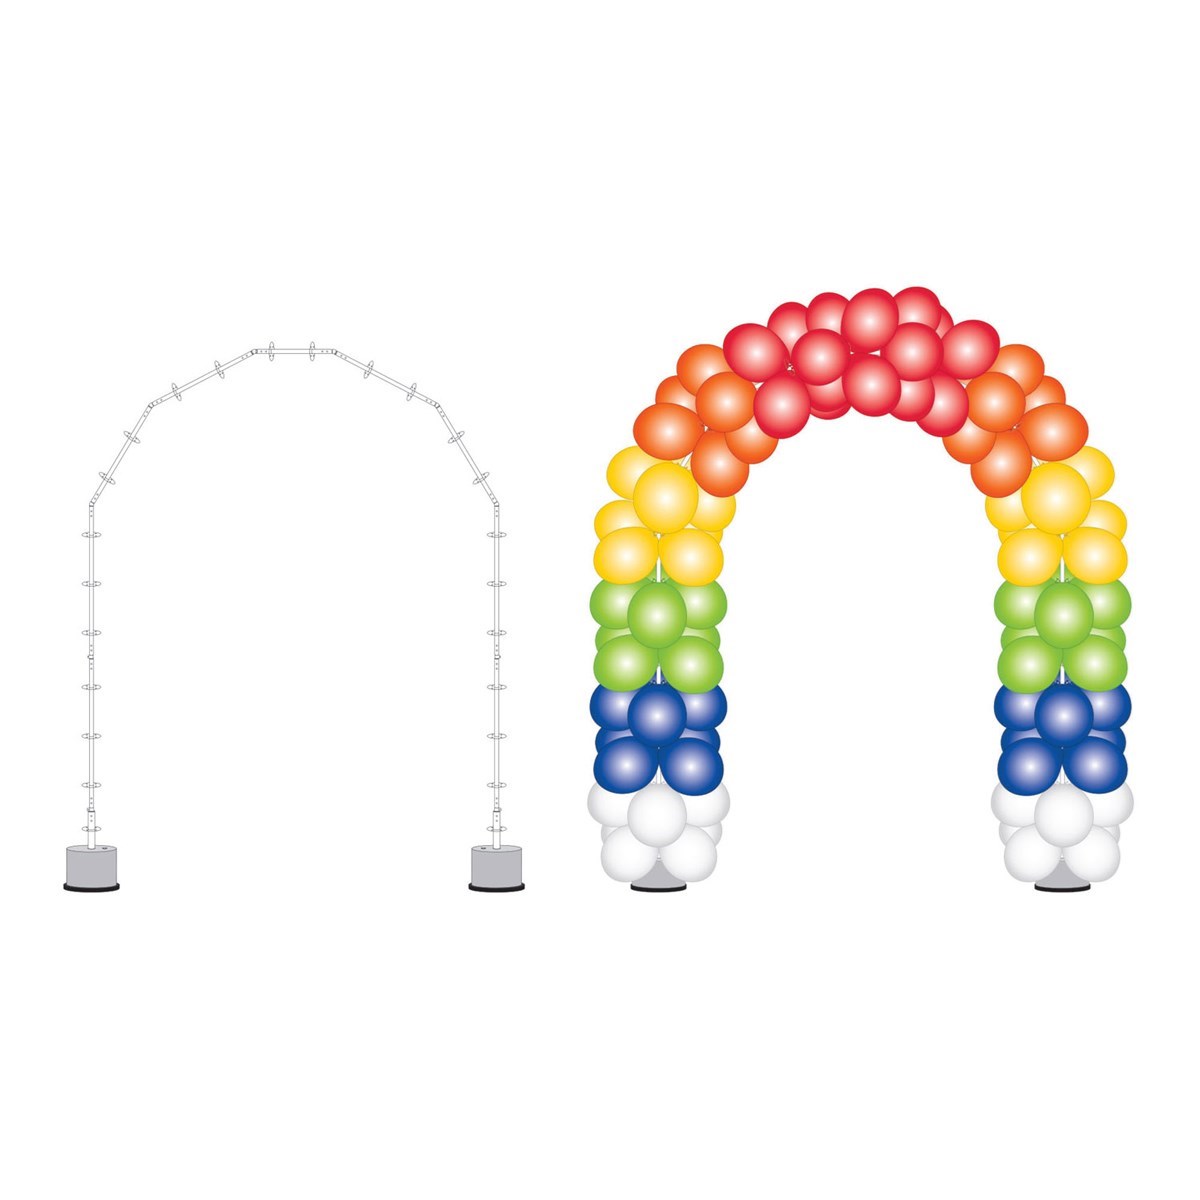 Details about   Balloon Arch Kit